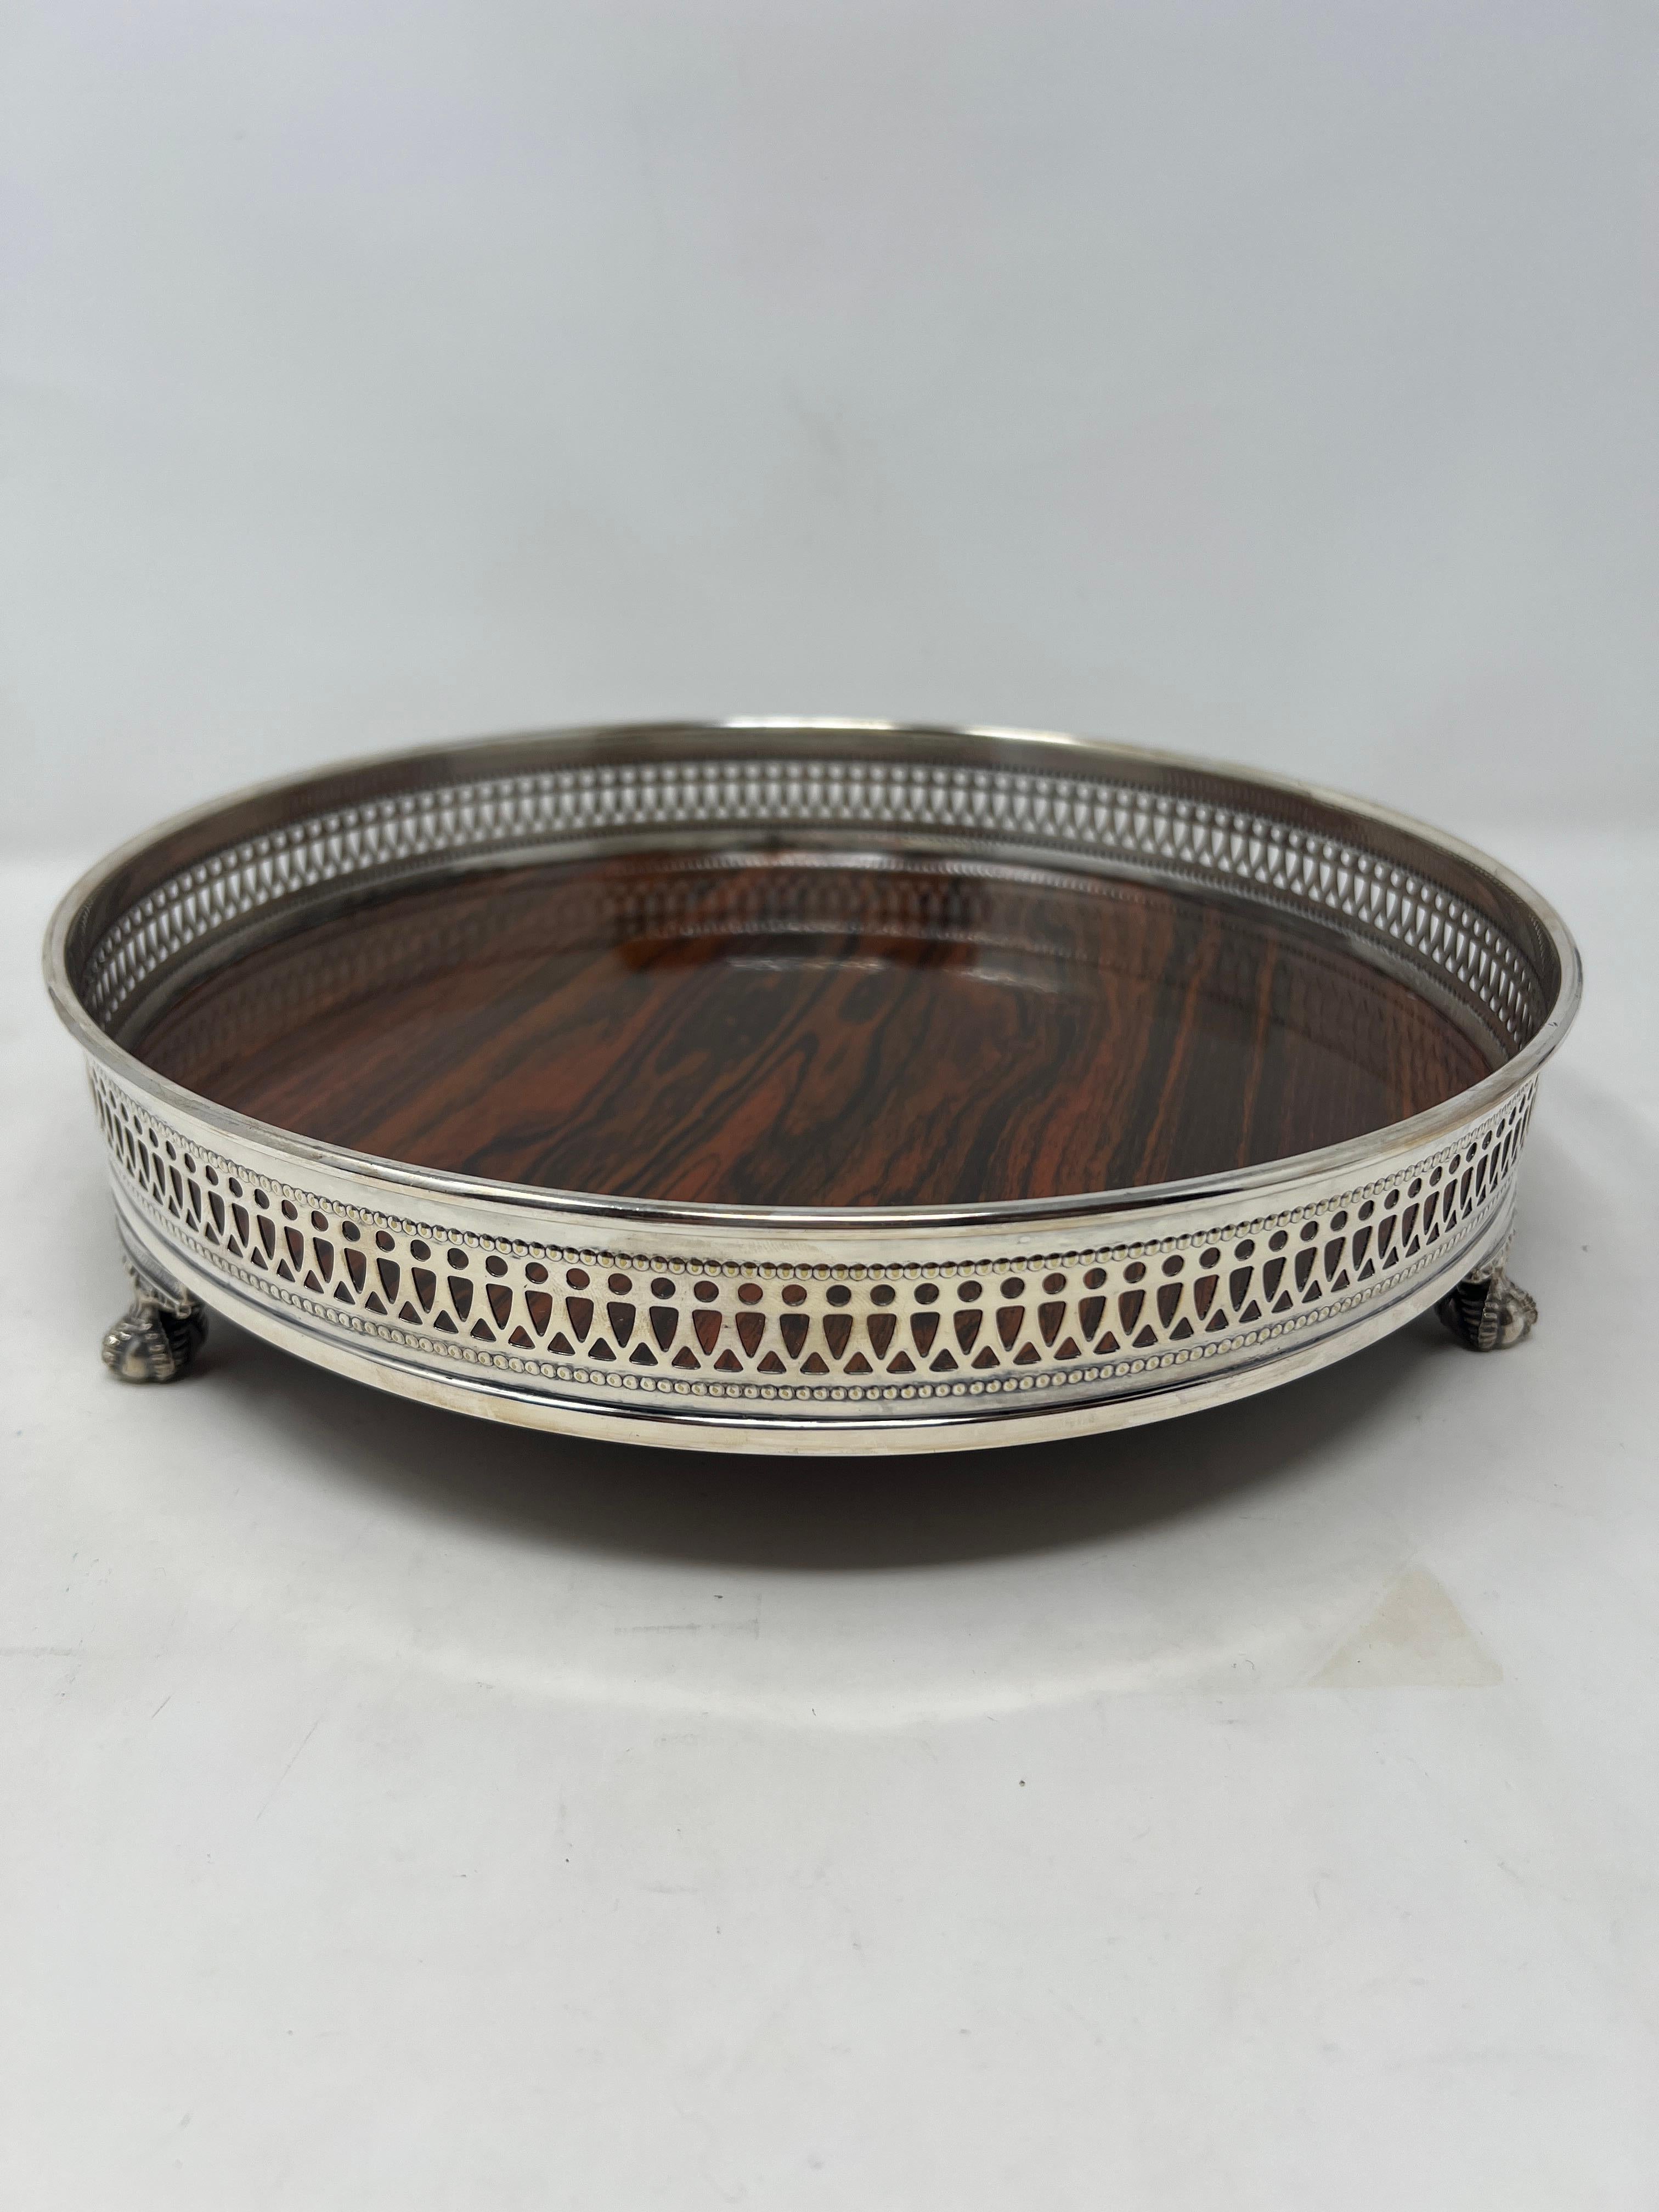 20th Century Estate English Silver-Plate Footed Galleried Tray, Circa 1950s-1960s. For Sale